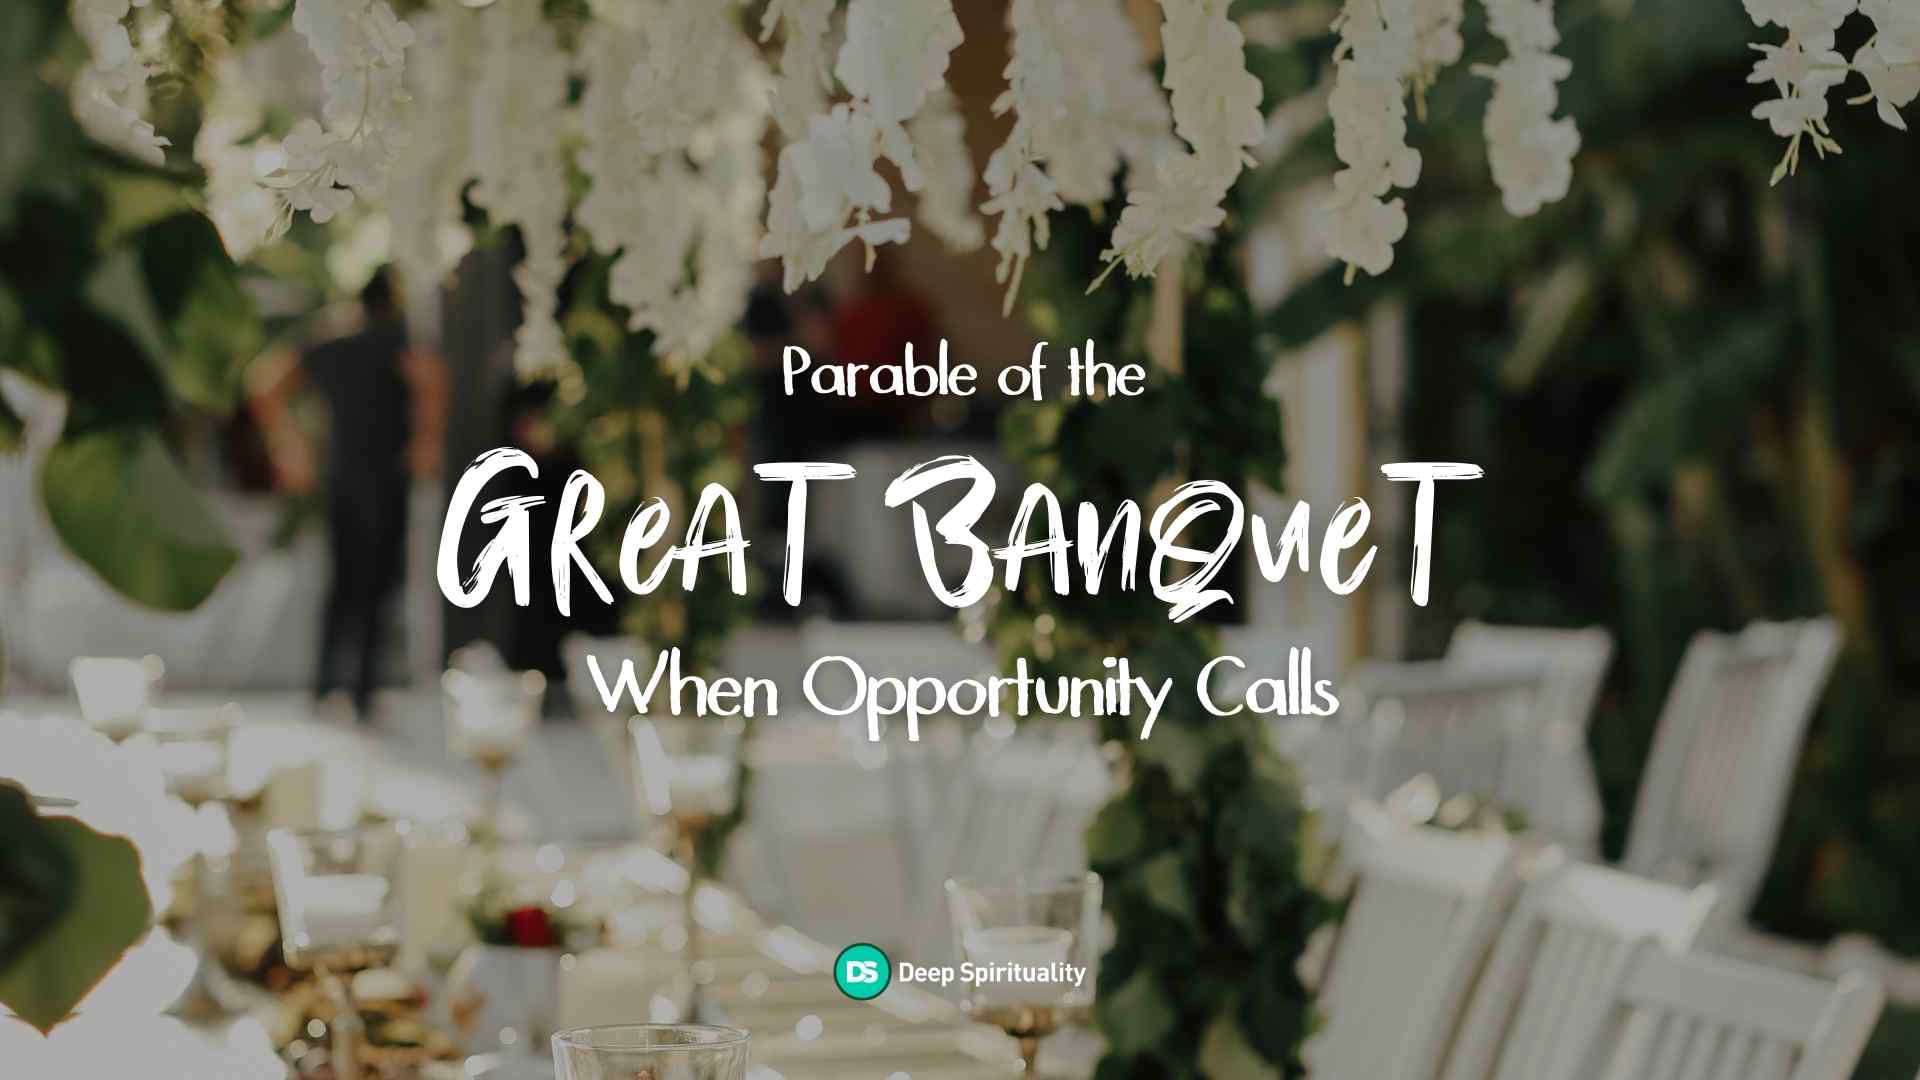 Parable of the Great Banquet: When Opportunity Calls 12